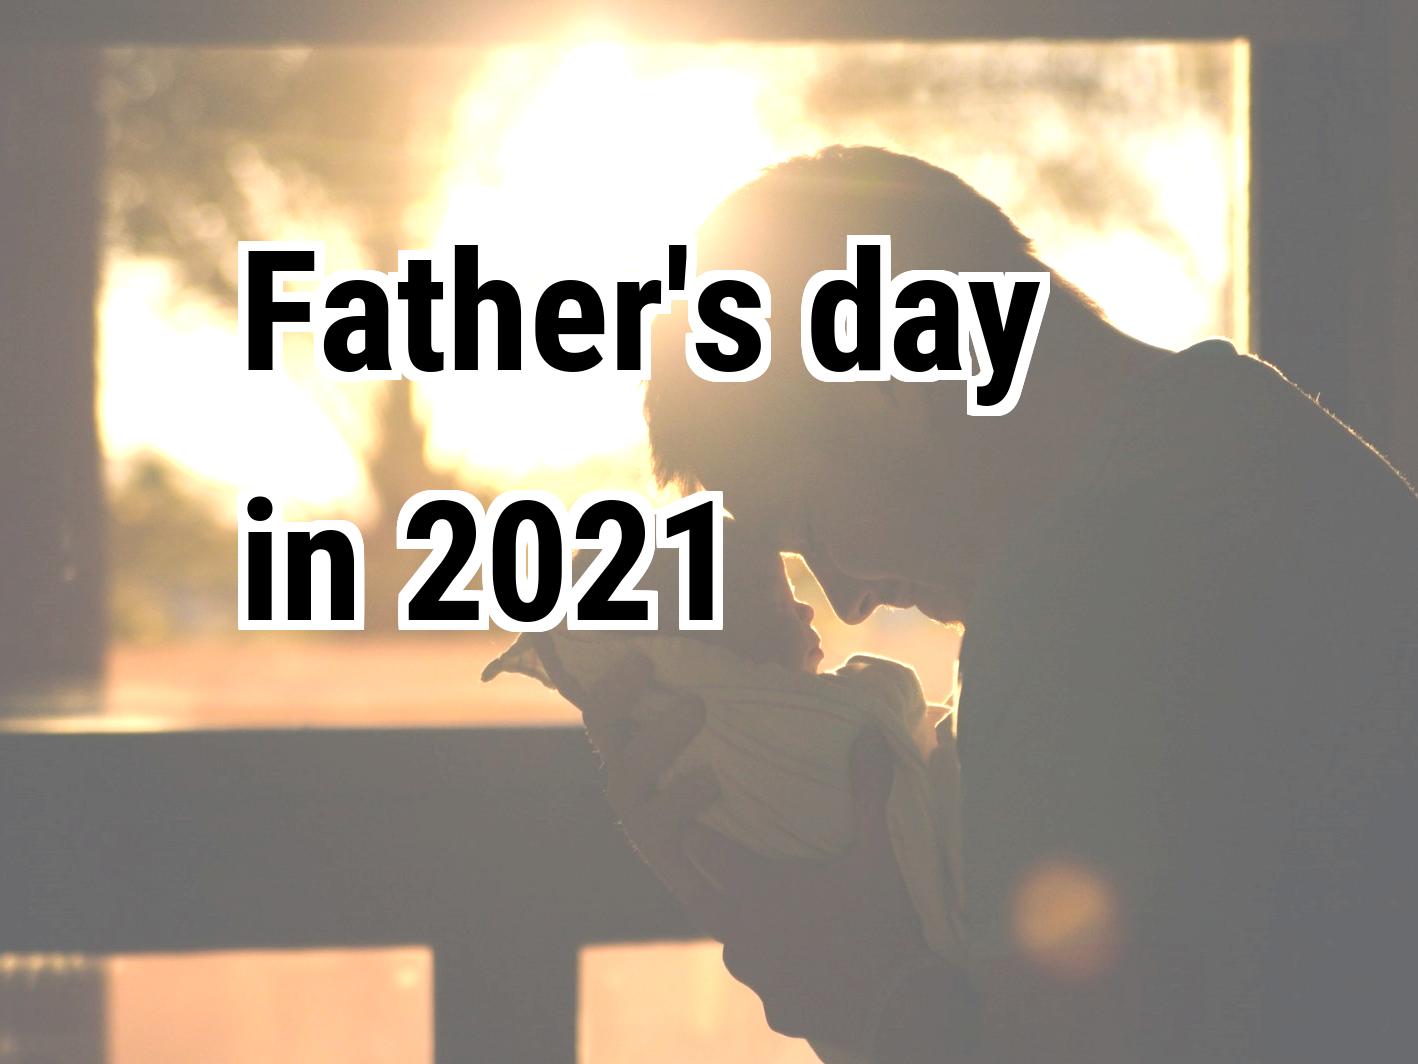 Father's day 2021. When is Father's day in 2021 Calendar